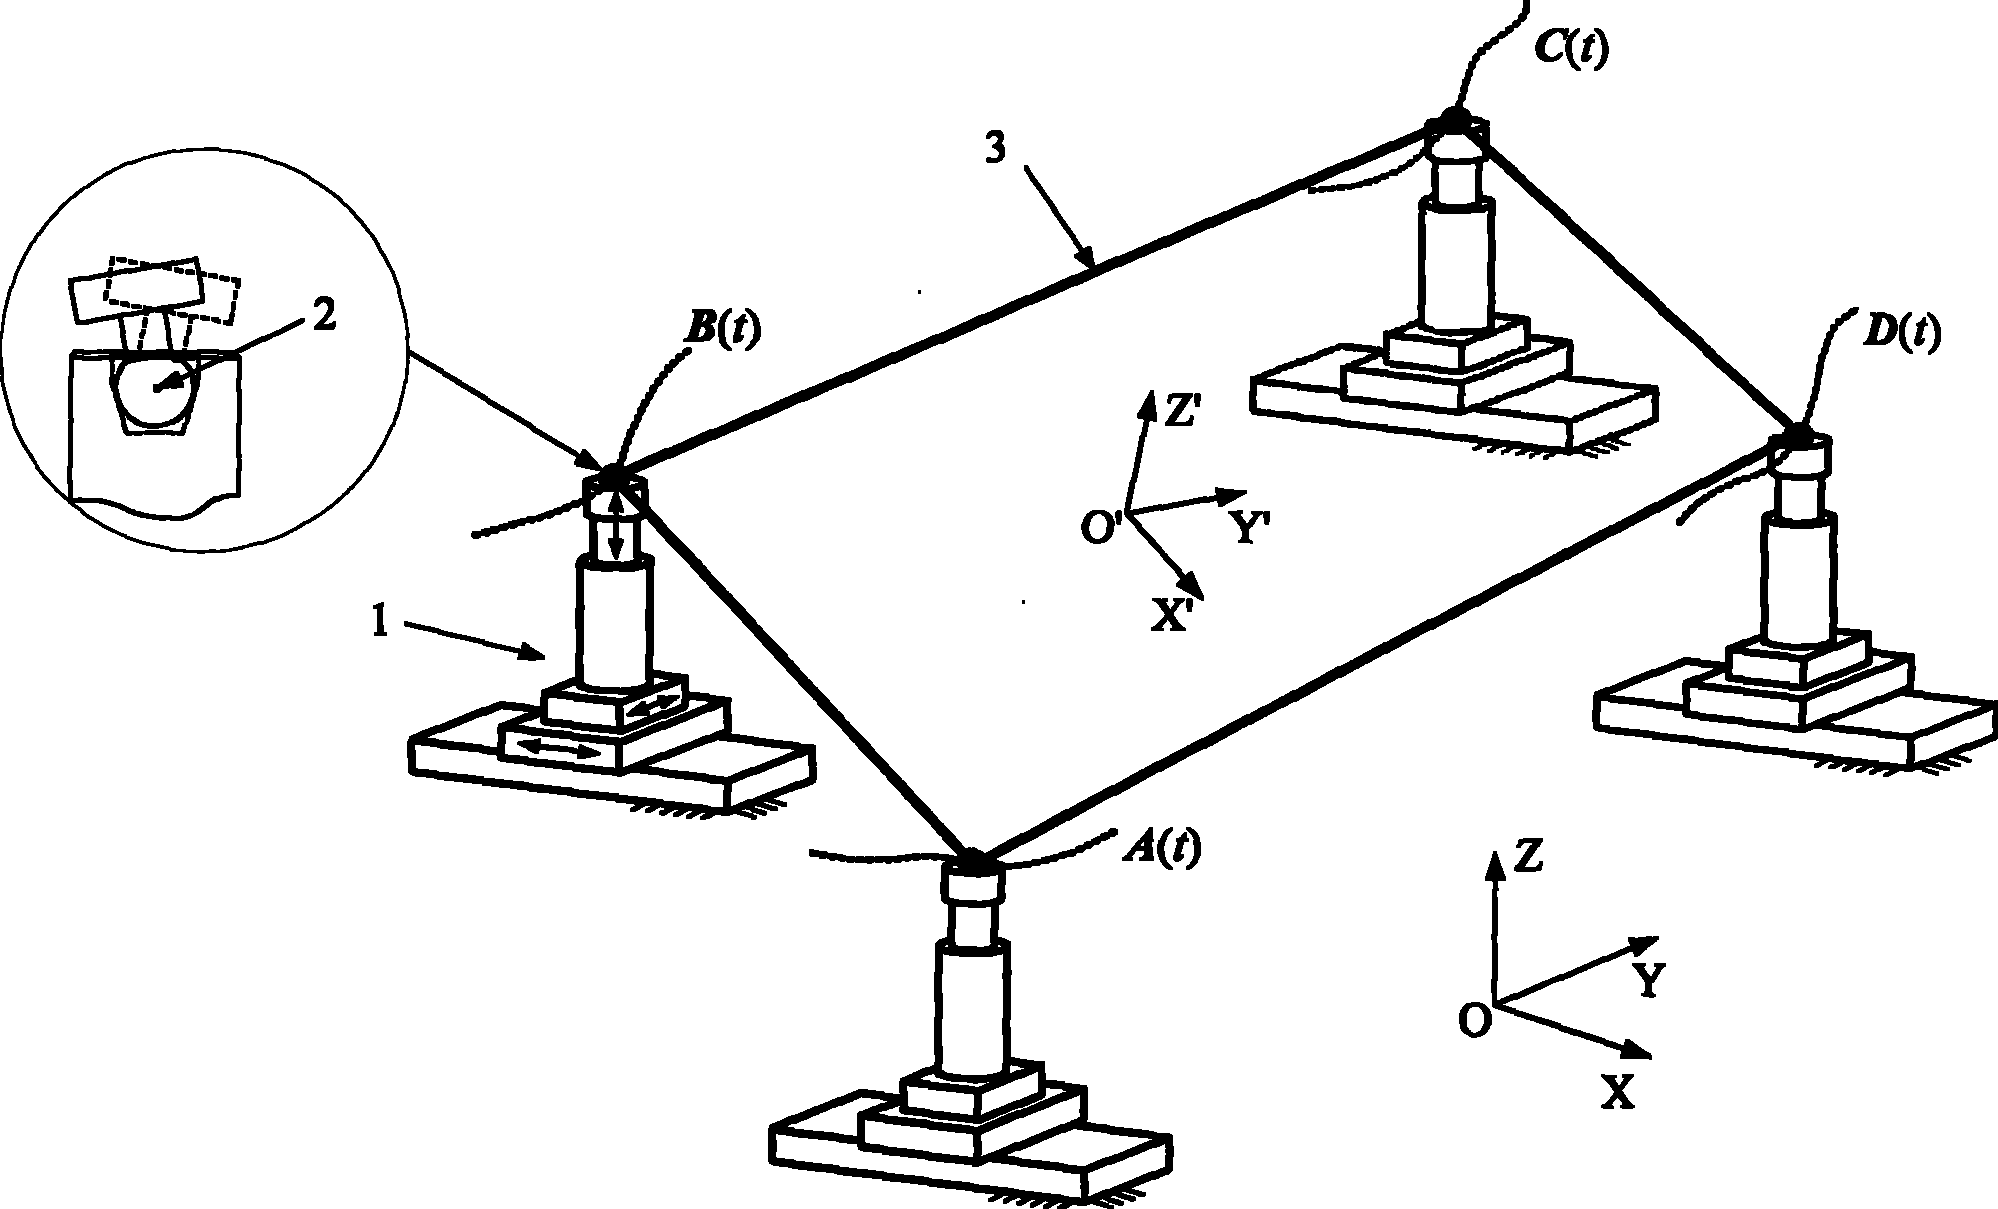 Synergetic control method of aircraft part pose alignment based on four locater